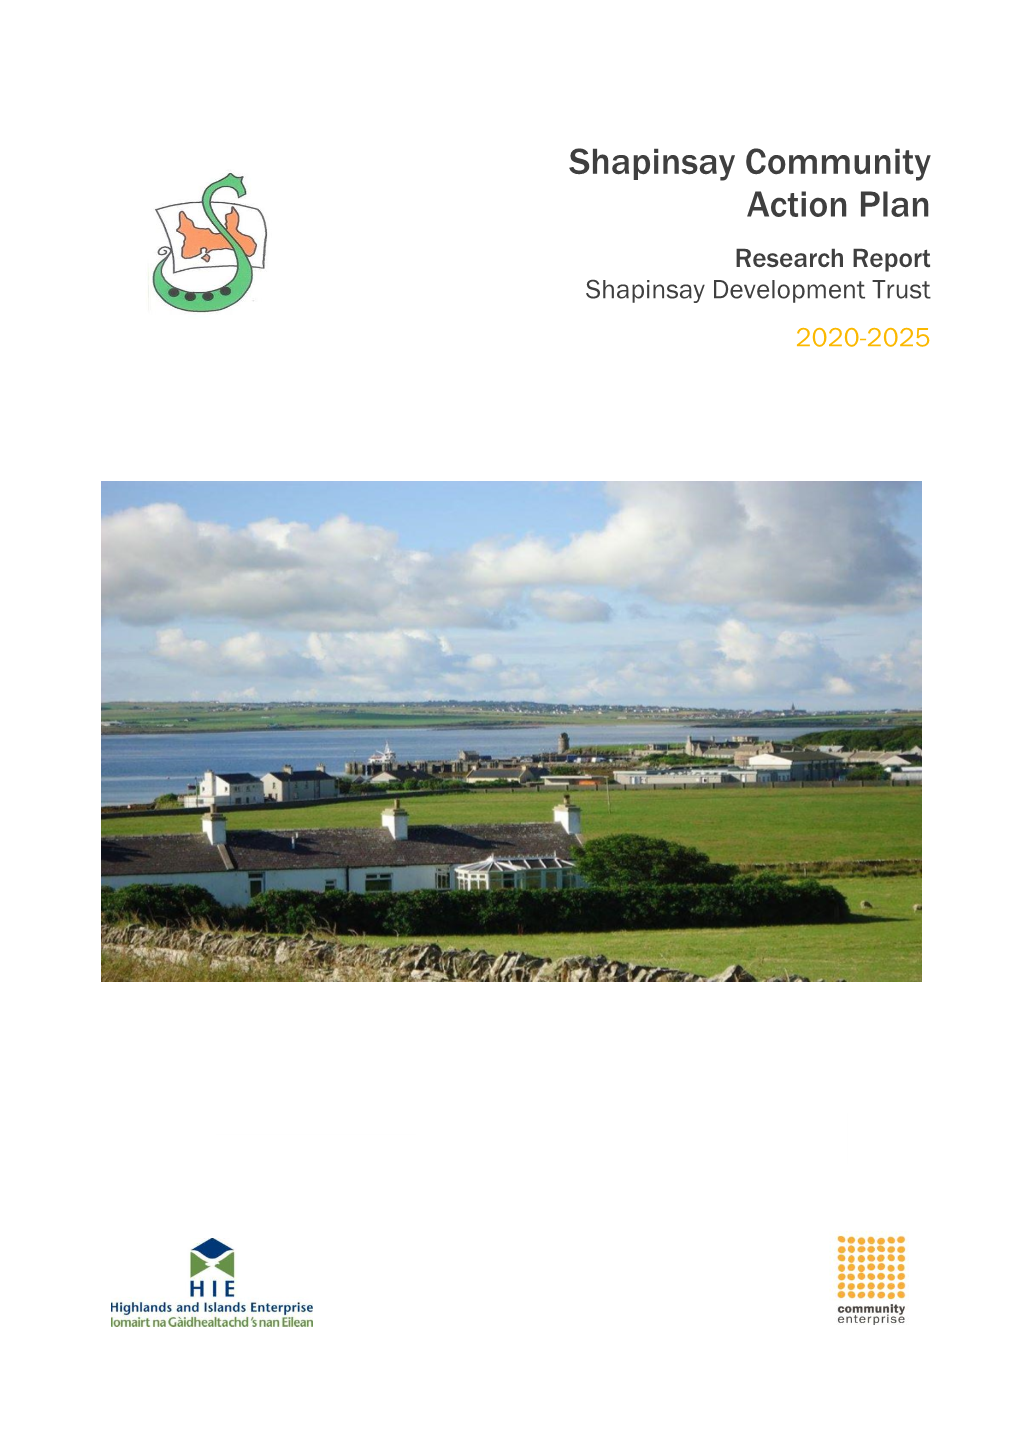 Shapinsay Community Action Plan Research Report Shapinsay Development Trust 2020-2025